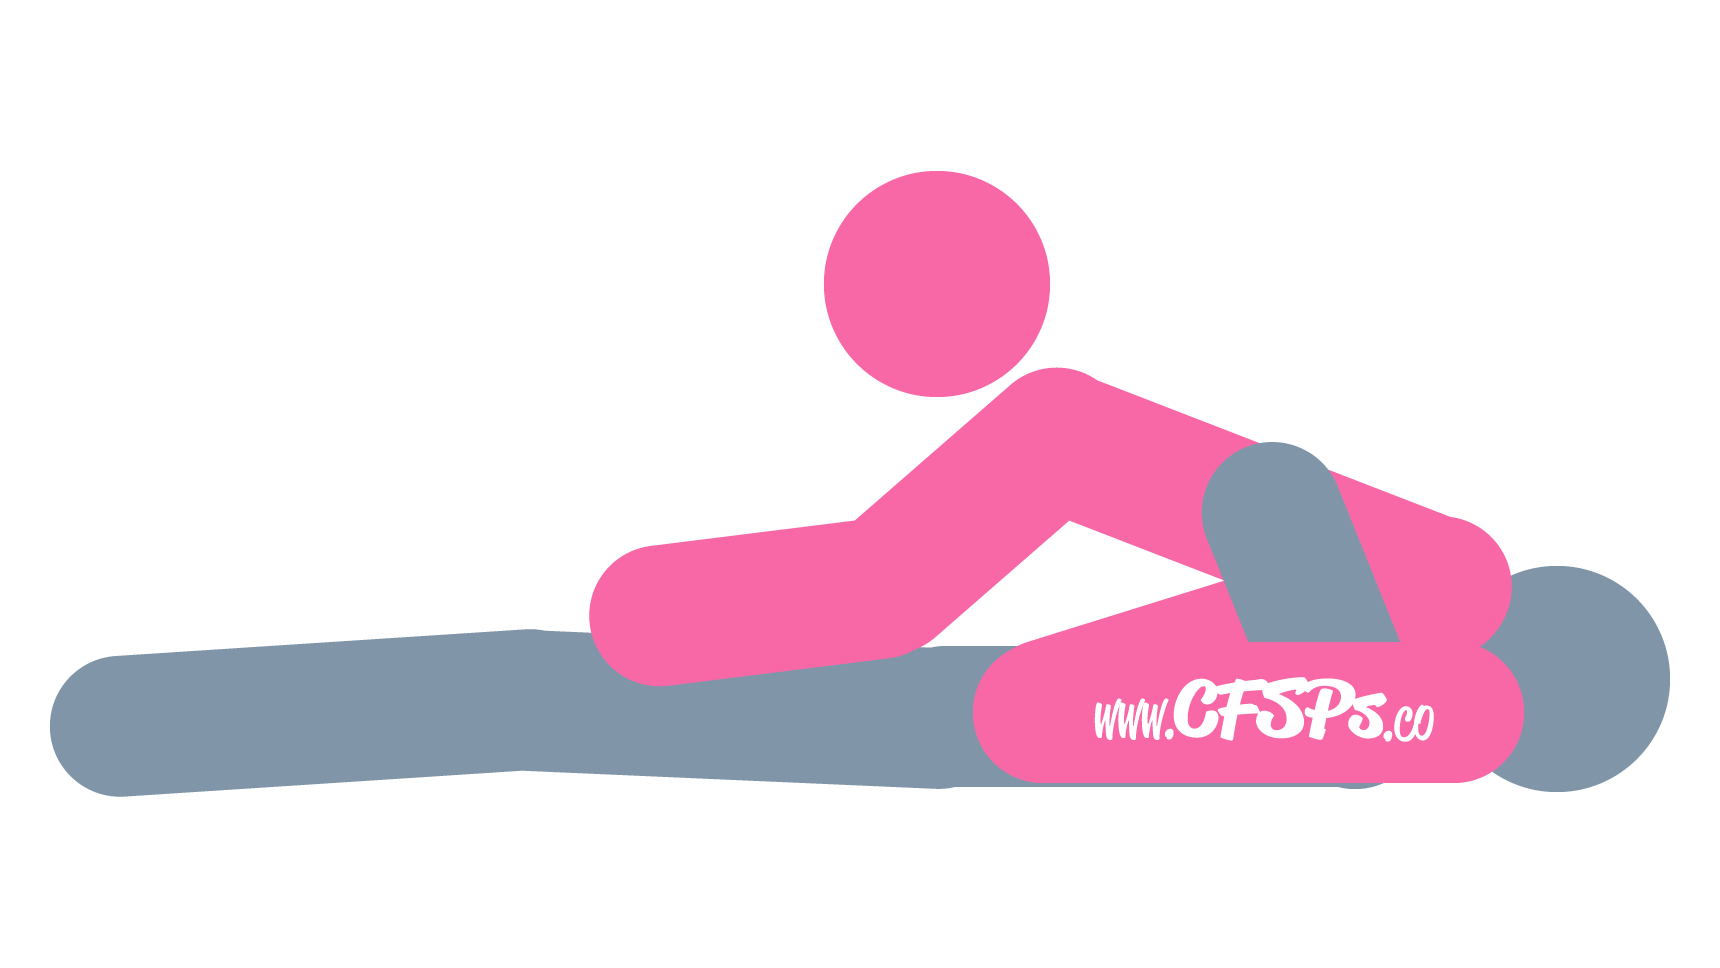 This stick figure image depicts a man and woman engaging in oral sex in the Blazing Saddles cunnilingus sex position. The man is lying on his back. The woman is straddling him with her knees near his sides, her vagina near his face, and she's leaning forward away from him.